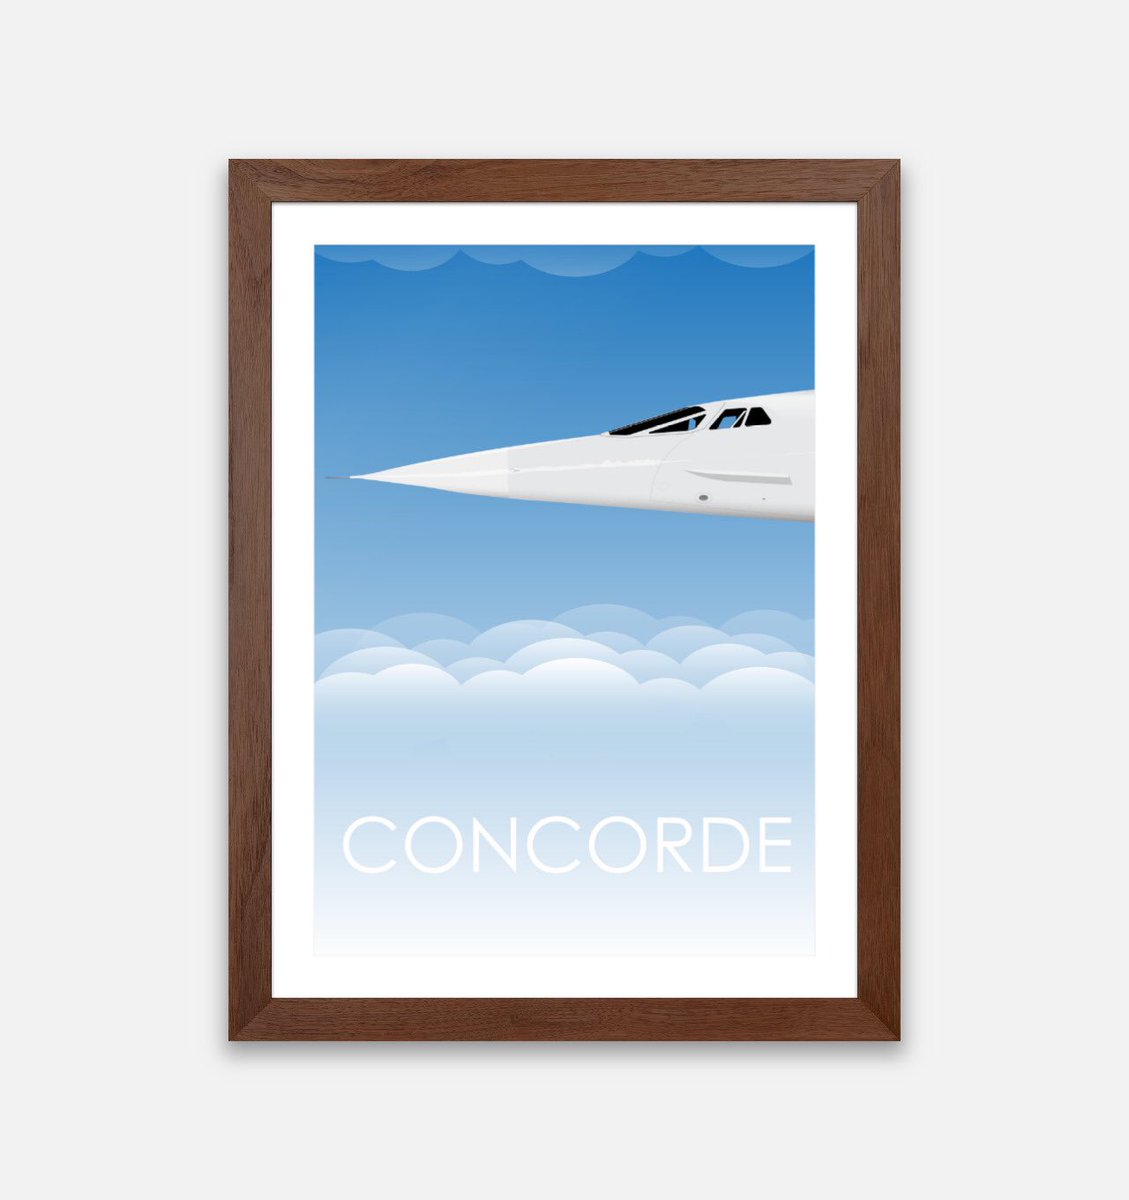 A magnificent flying machine. #concorde #concordeplane #plane #planespotting #planelovers #planepics #planegeek #airplane #airplanelovers #airplanephotos #airplanes #airplane_lovers #airplanepictures #airplanespotting #airplanephotography #aeroplane #aeroplanes #aeroplanelovers